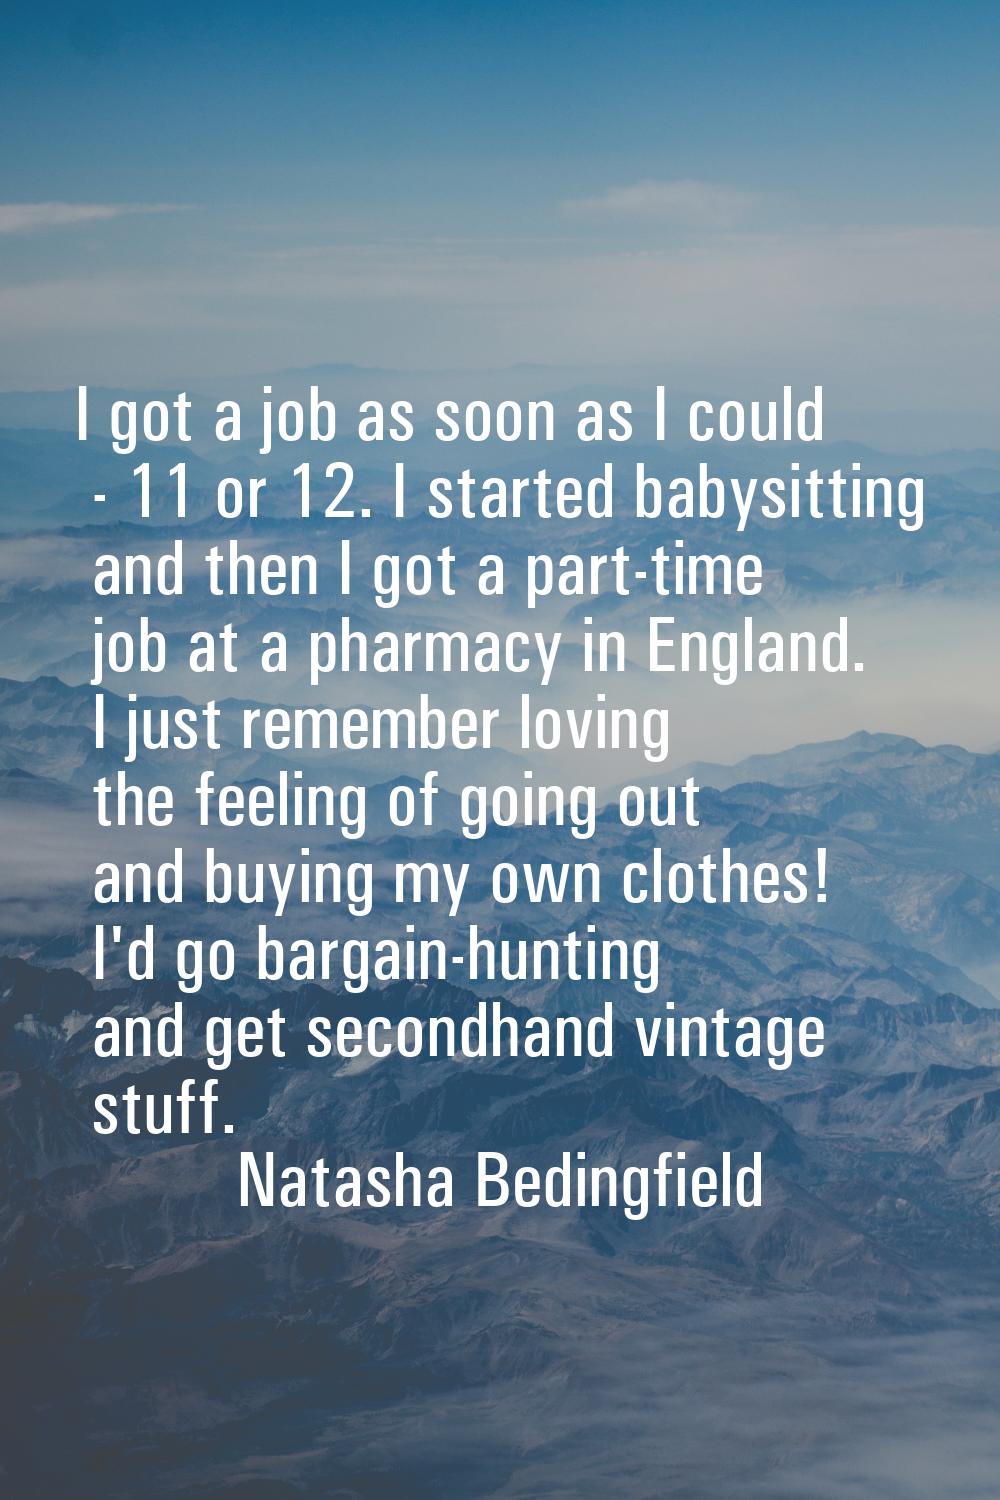 I got a job as soon as I could - 11 or 12. I started babysitting and then I got a part-time job at 